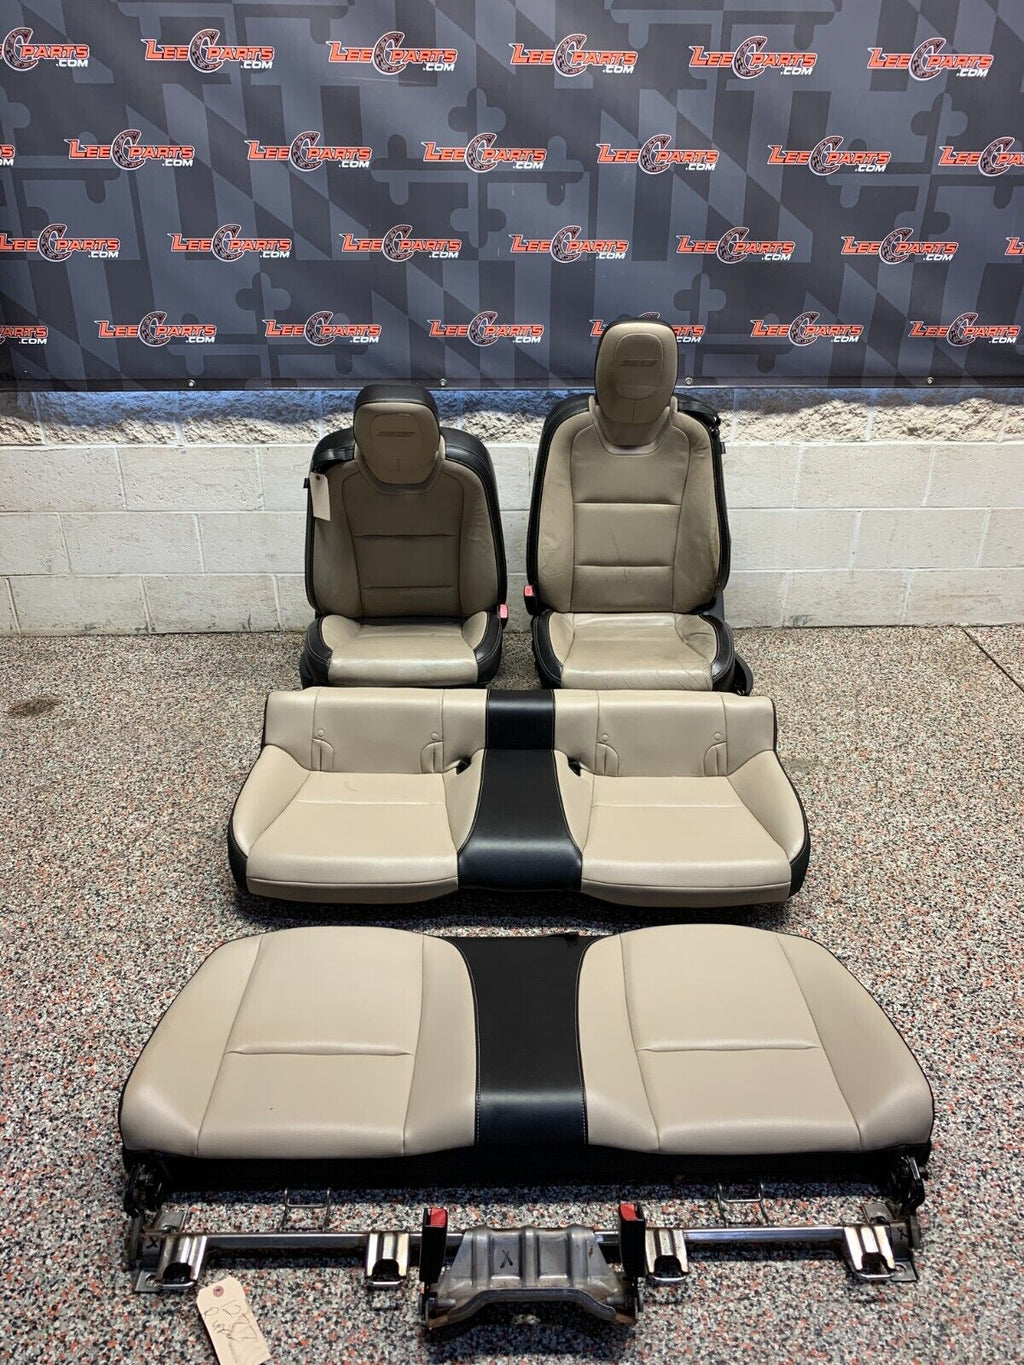 2010 CAMARO SS FRONT REAR LEATHER SEATS TAN/BLACK NICE! USED!